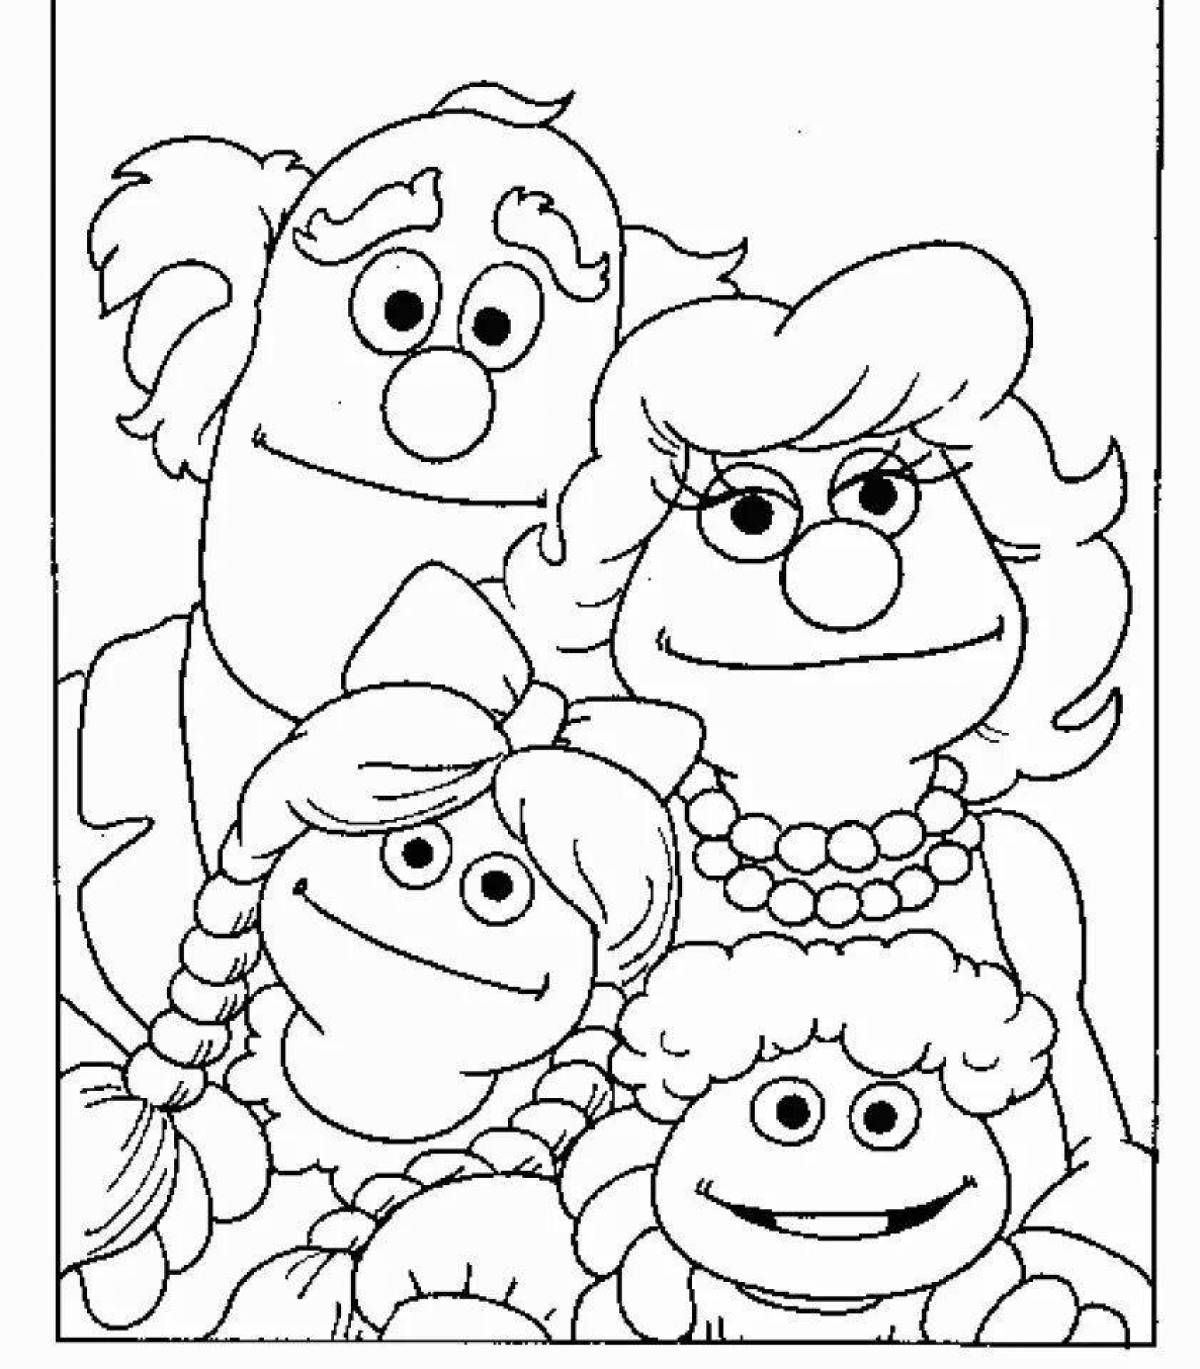 Inspirational family coloring book for 7 year olds